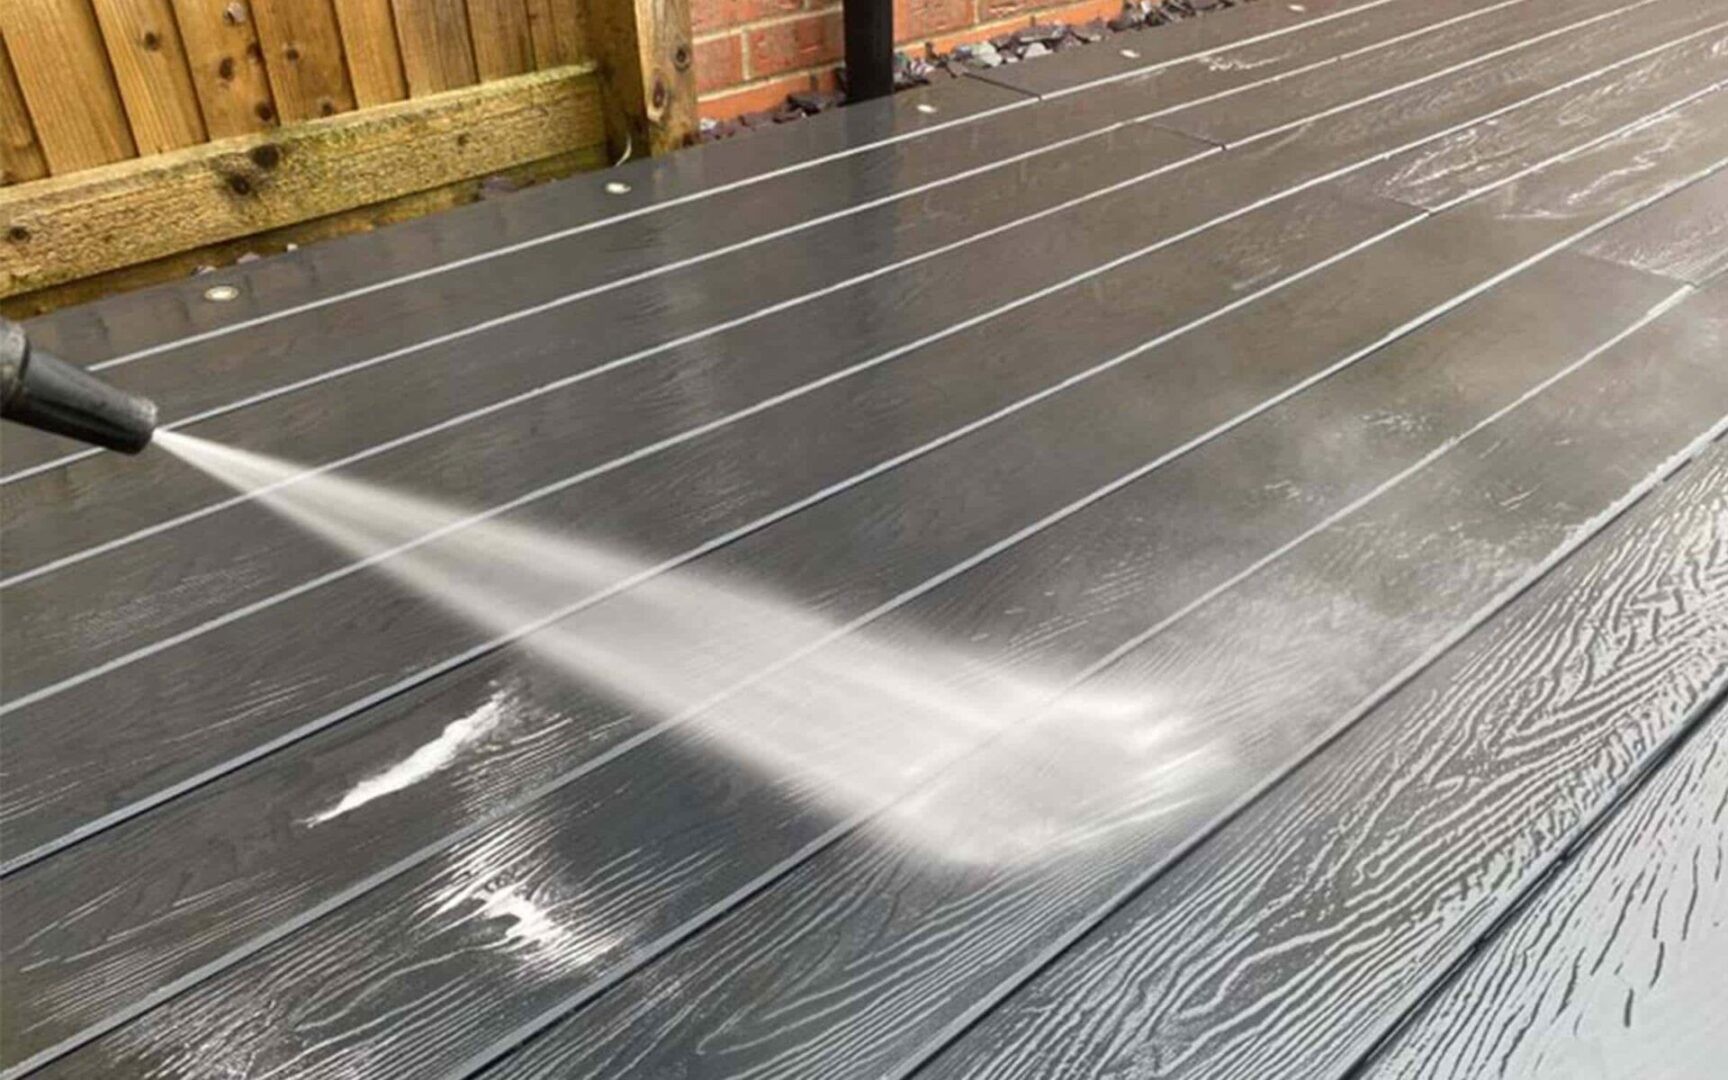 Can I power wash composite decking boards?